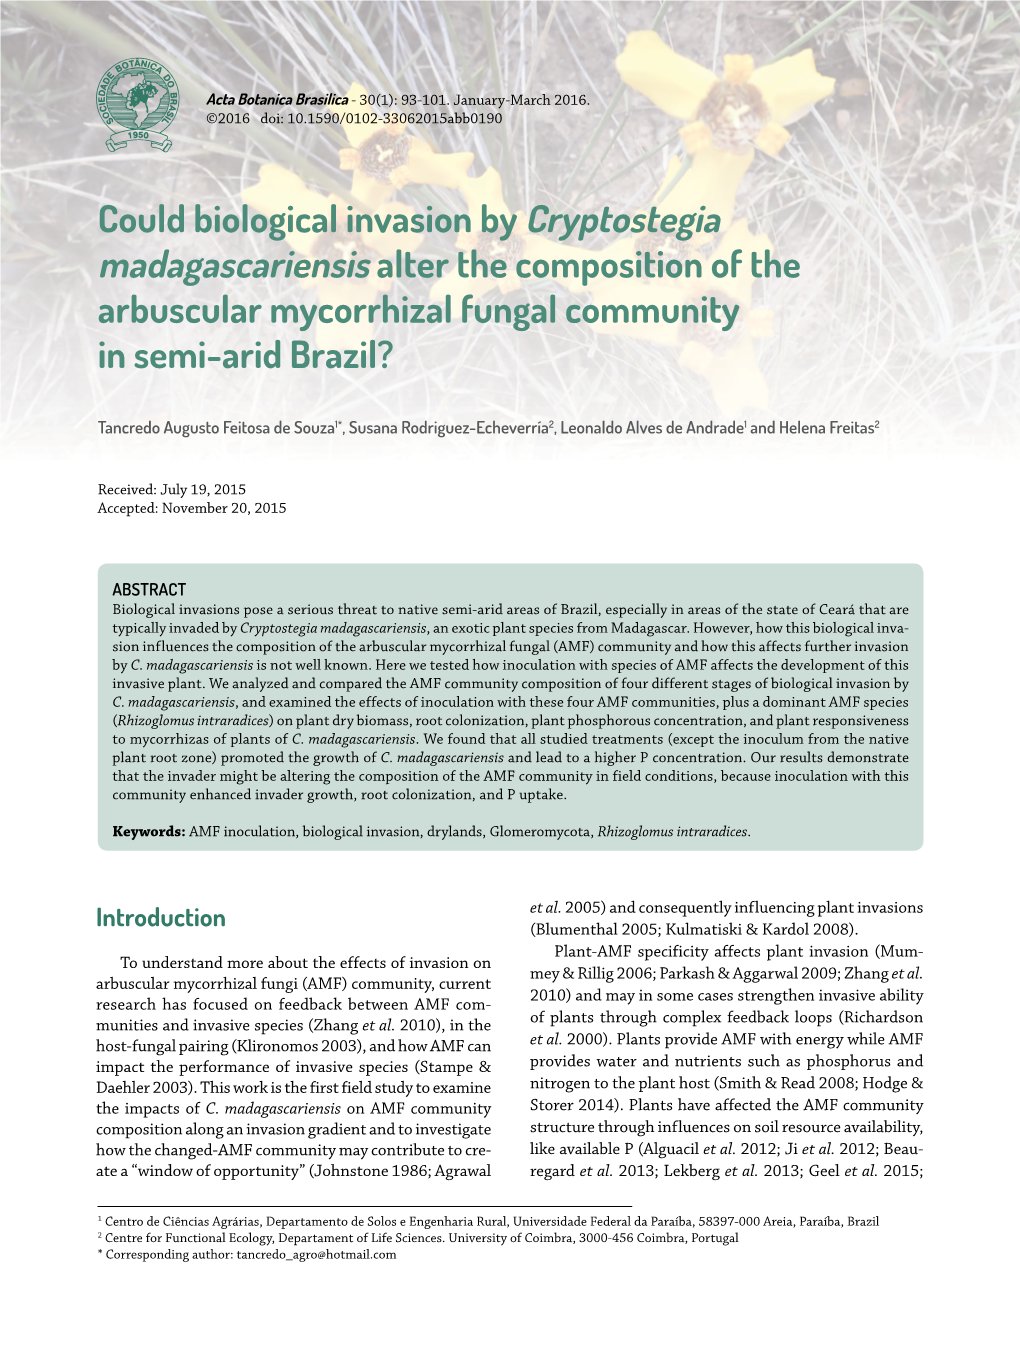 Could Biological Invasion by Cryptostegia Madagascariensis Alter the Composition of the Arbuscular Mycorrhizal Fungal Community in Semi-Arid Brazil?